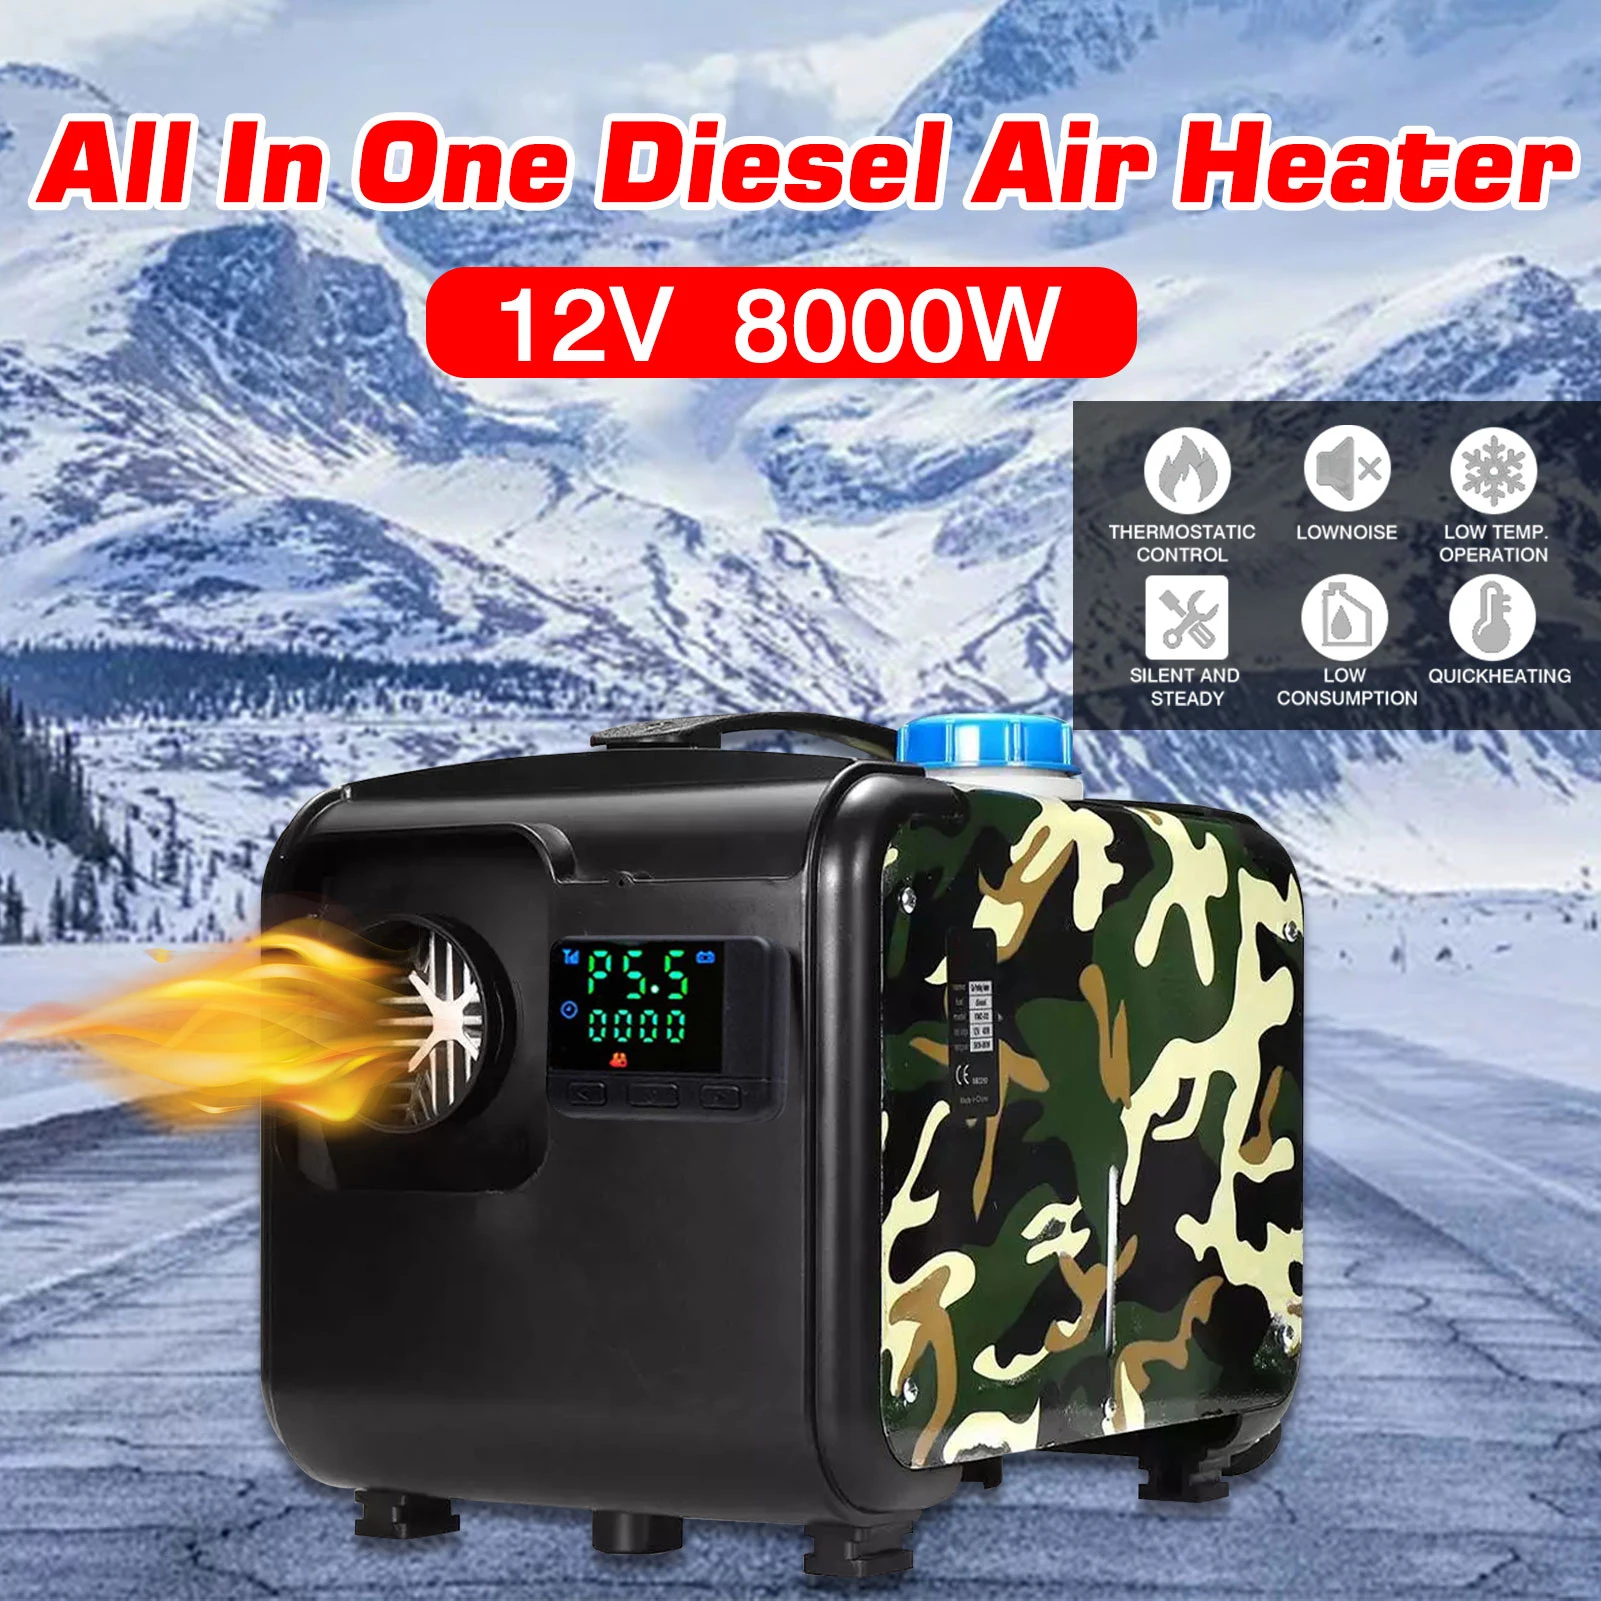 

Car Heater 8KW 12V Air Diesels Heater Parking Heater With Remote Control LCD Monitor For RV, Motorhome Trailer, Trucks, Boats